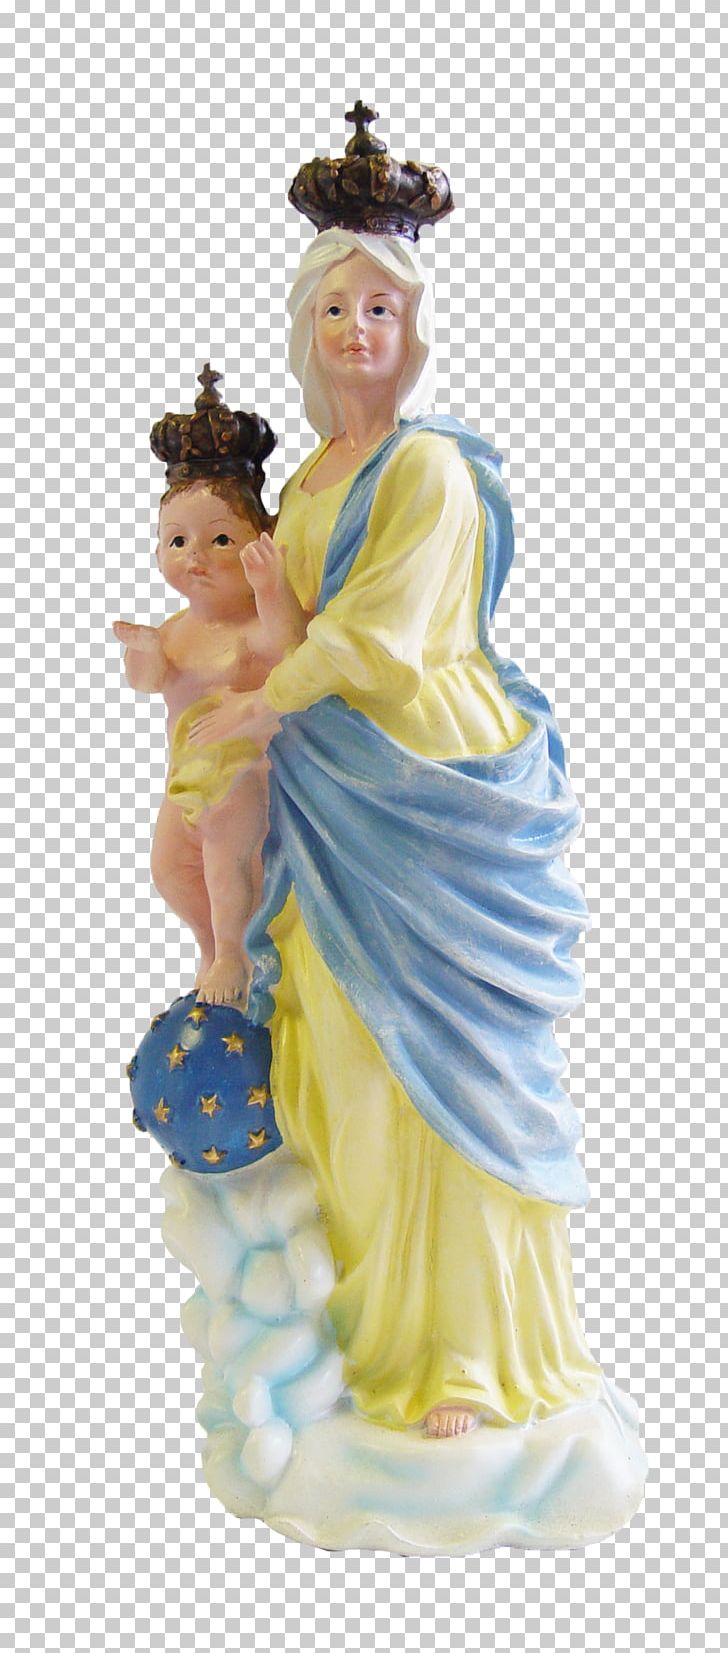 Figurine Statue PNG, Clipart, Figurine, Others, Statue, Vigne Vierge Free PNG Download